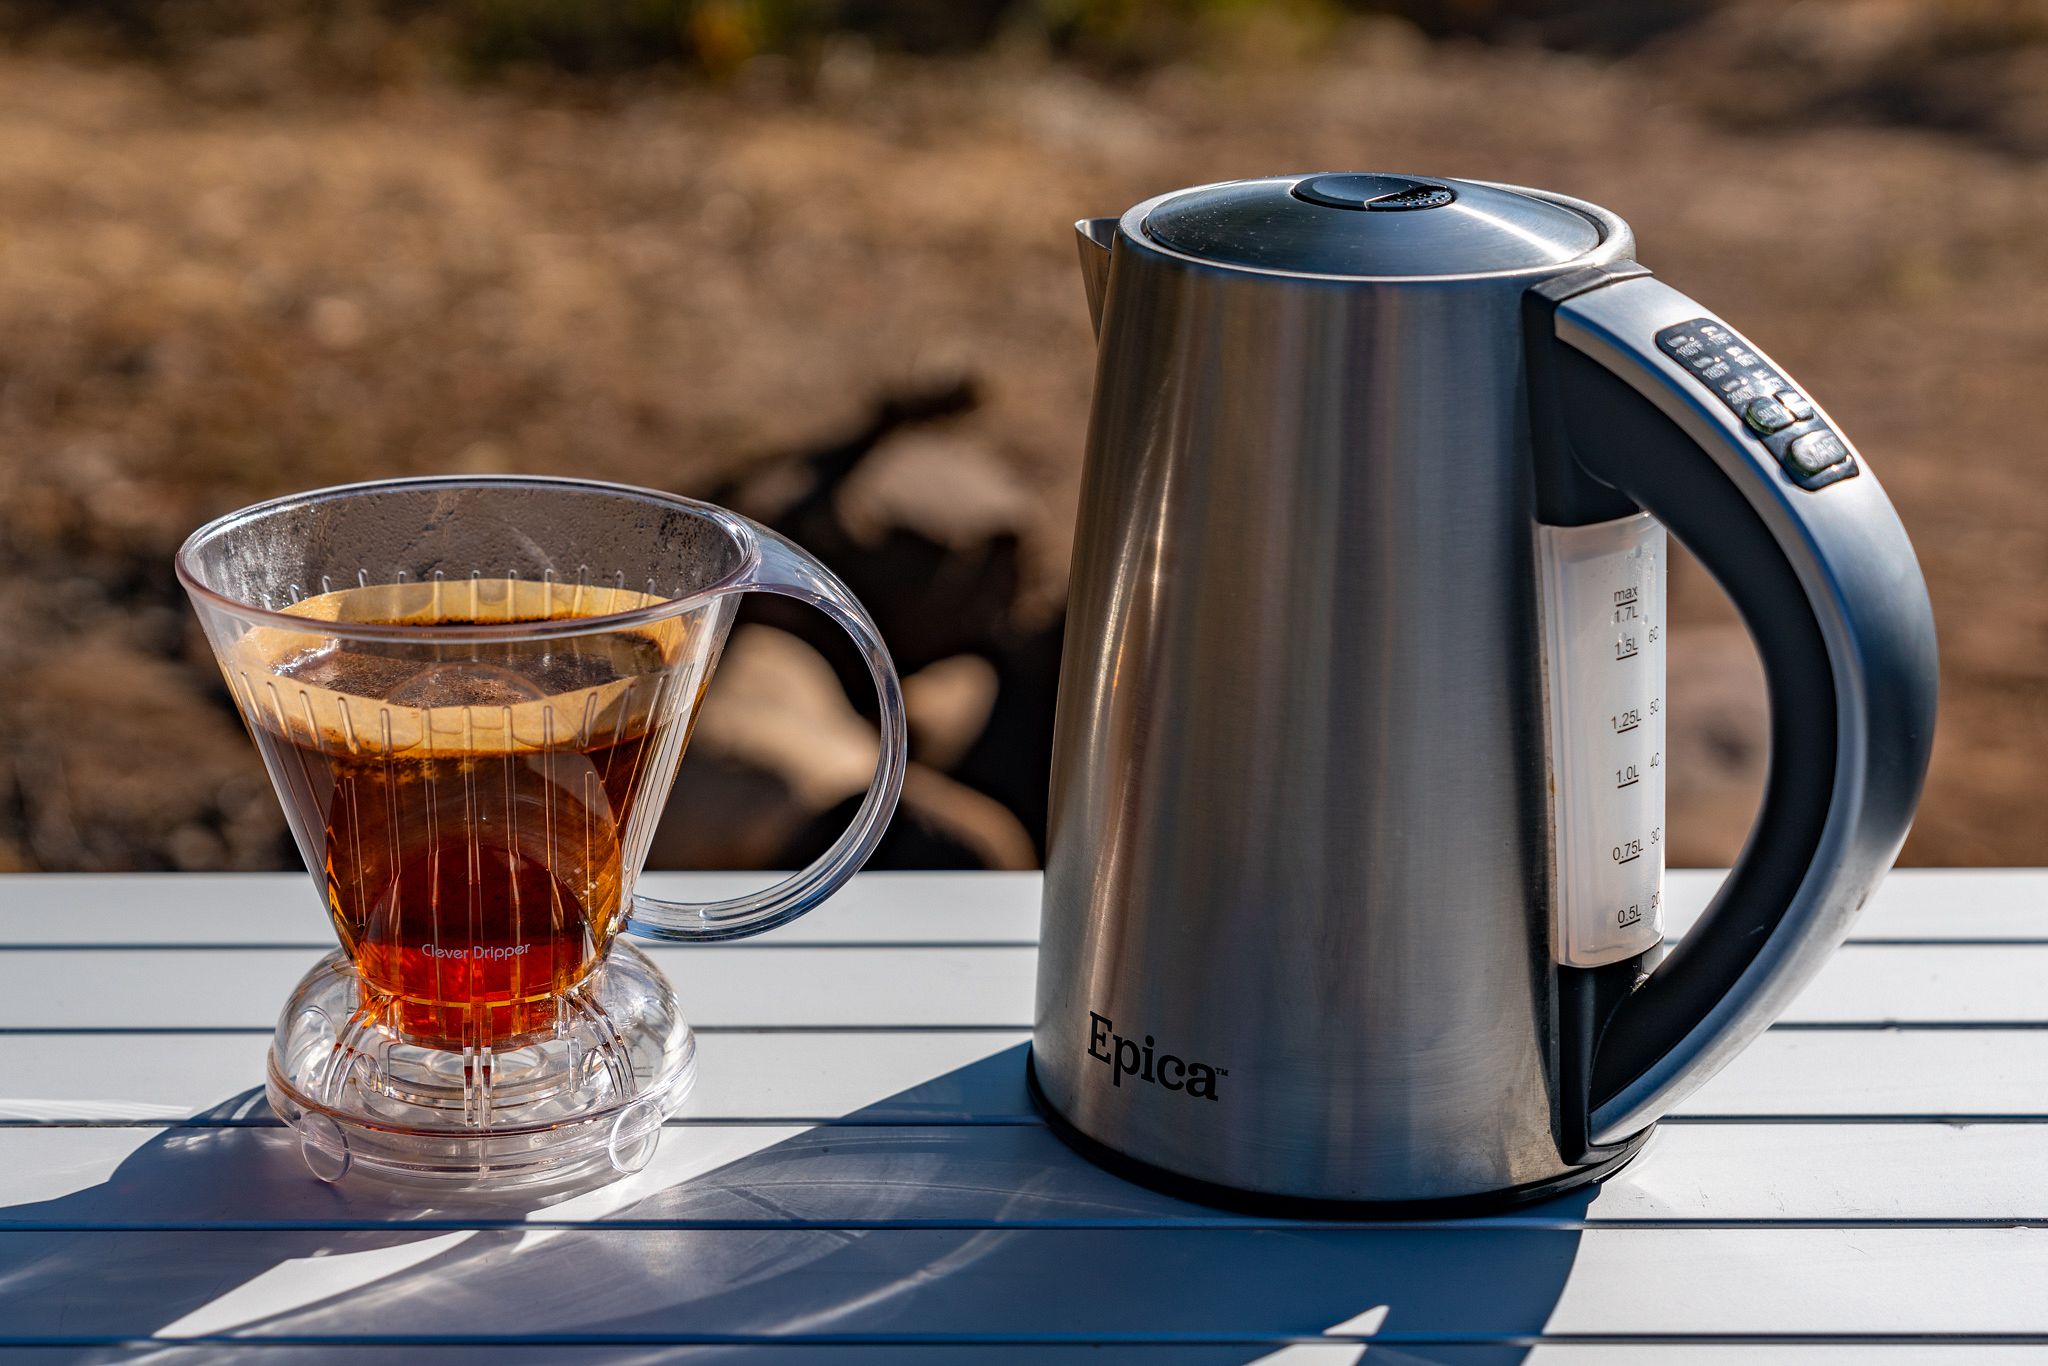 Epica Electric Kettle